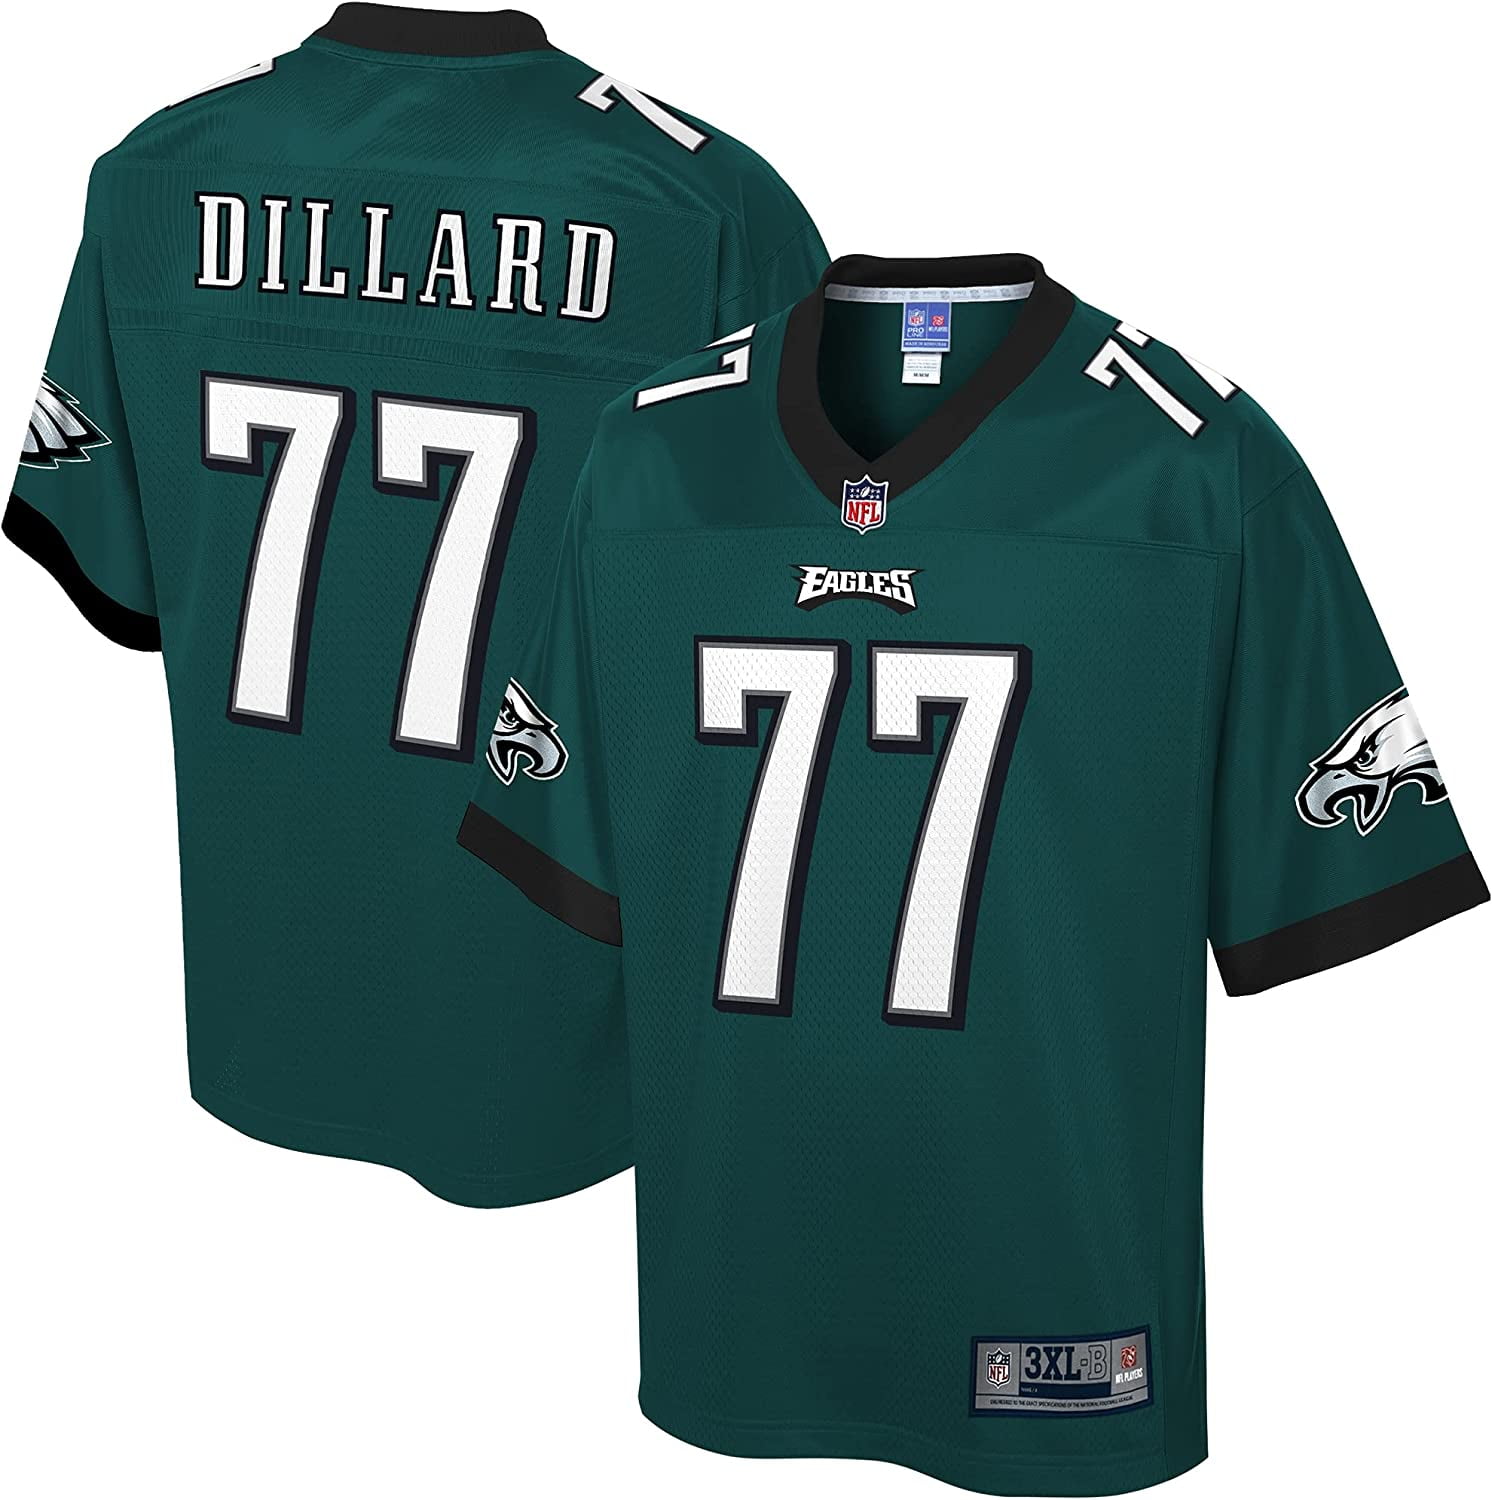 NFL_PRO LINE Men's Andre Dillard Midnight Green Philadelphia Eagles_ Big &  Tall Player Jersey(Player numbers can be customized) 